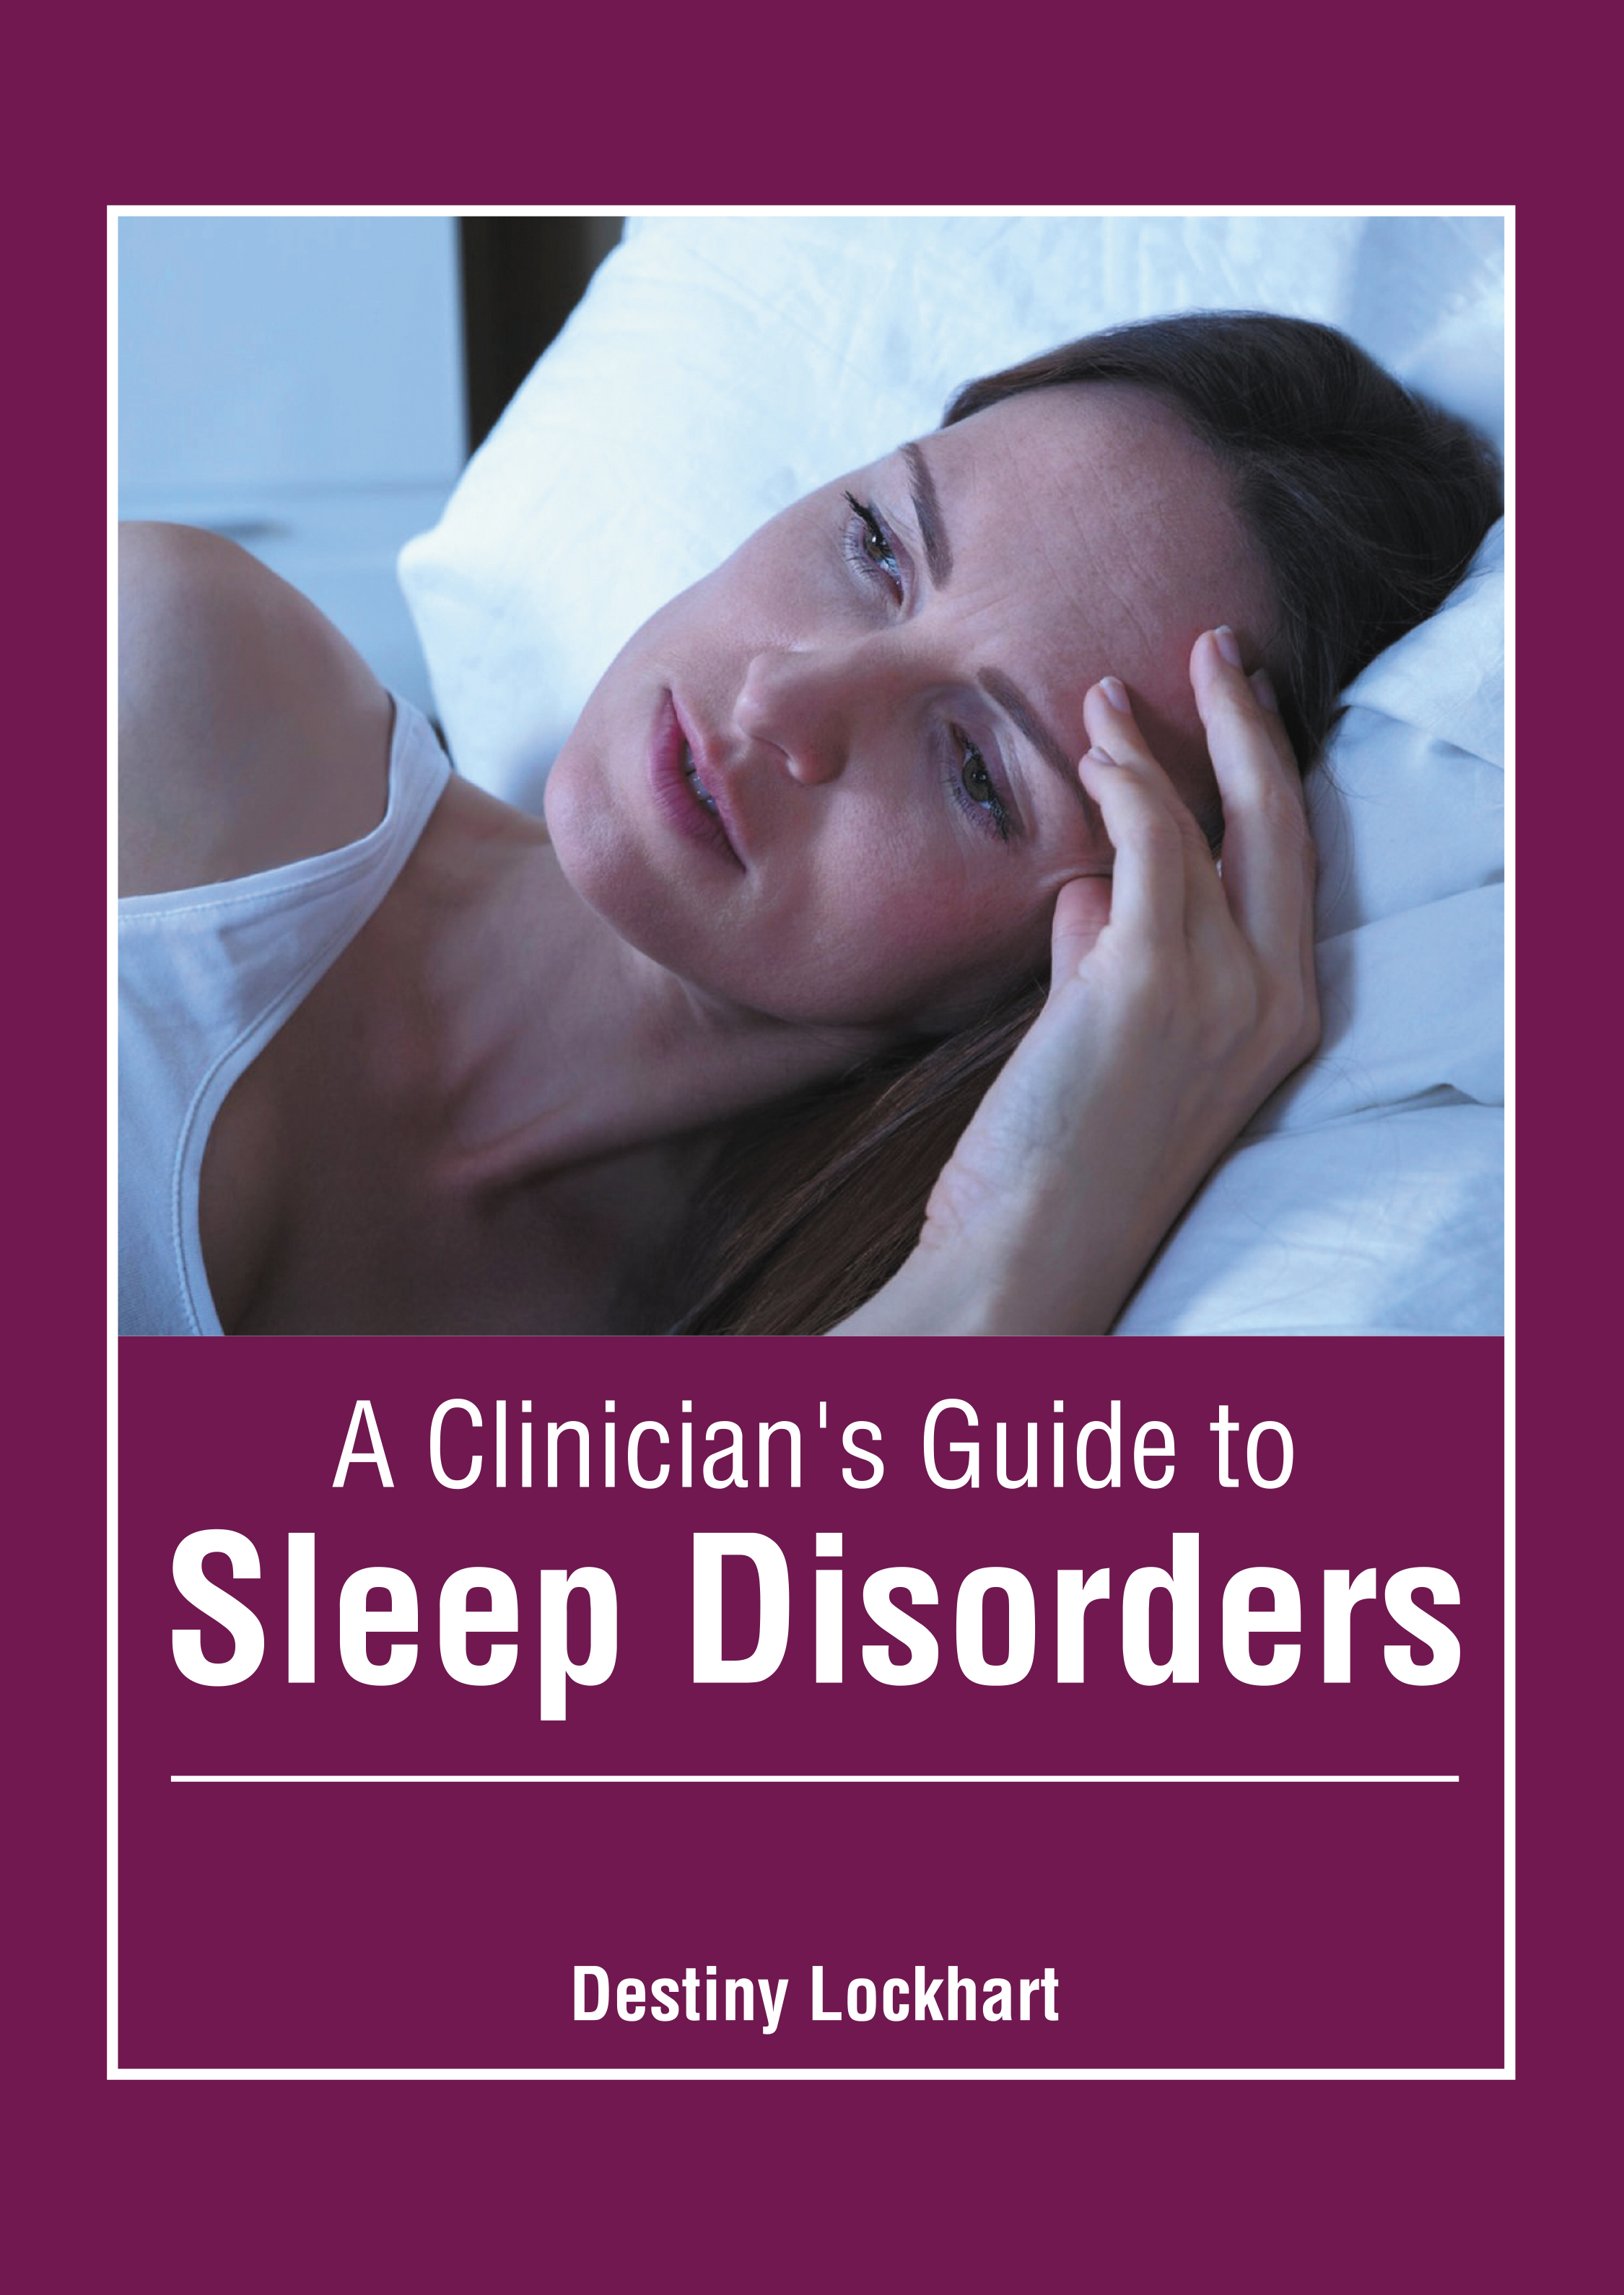 

medical-reference-books/psychiatry/a-clinician-s-guide-to-sleep-disorders-9781639270873